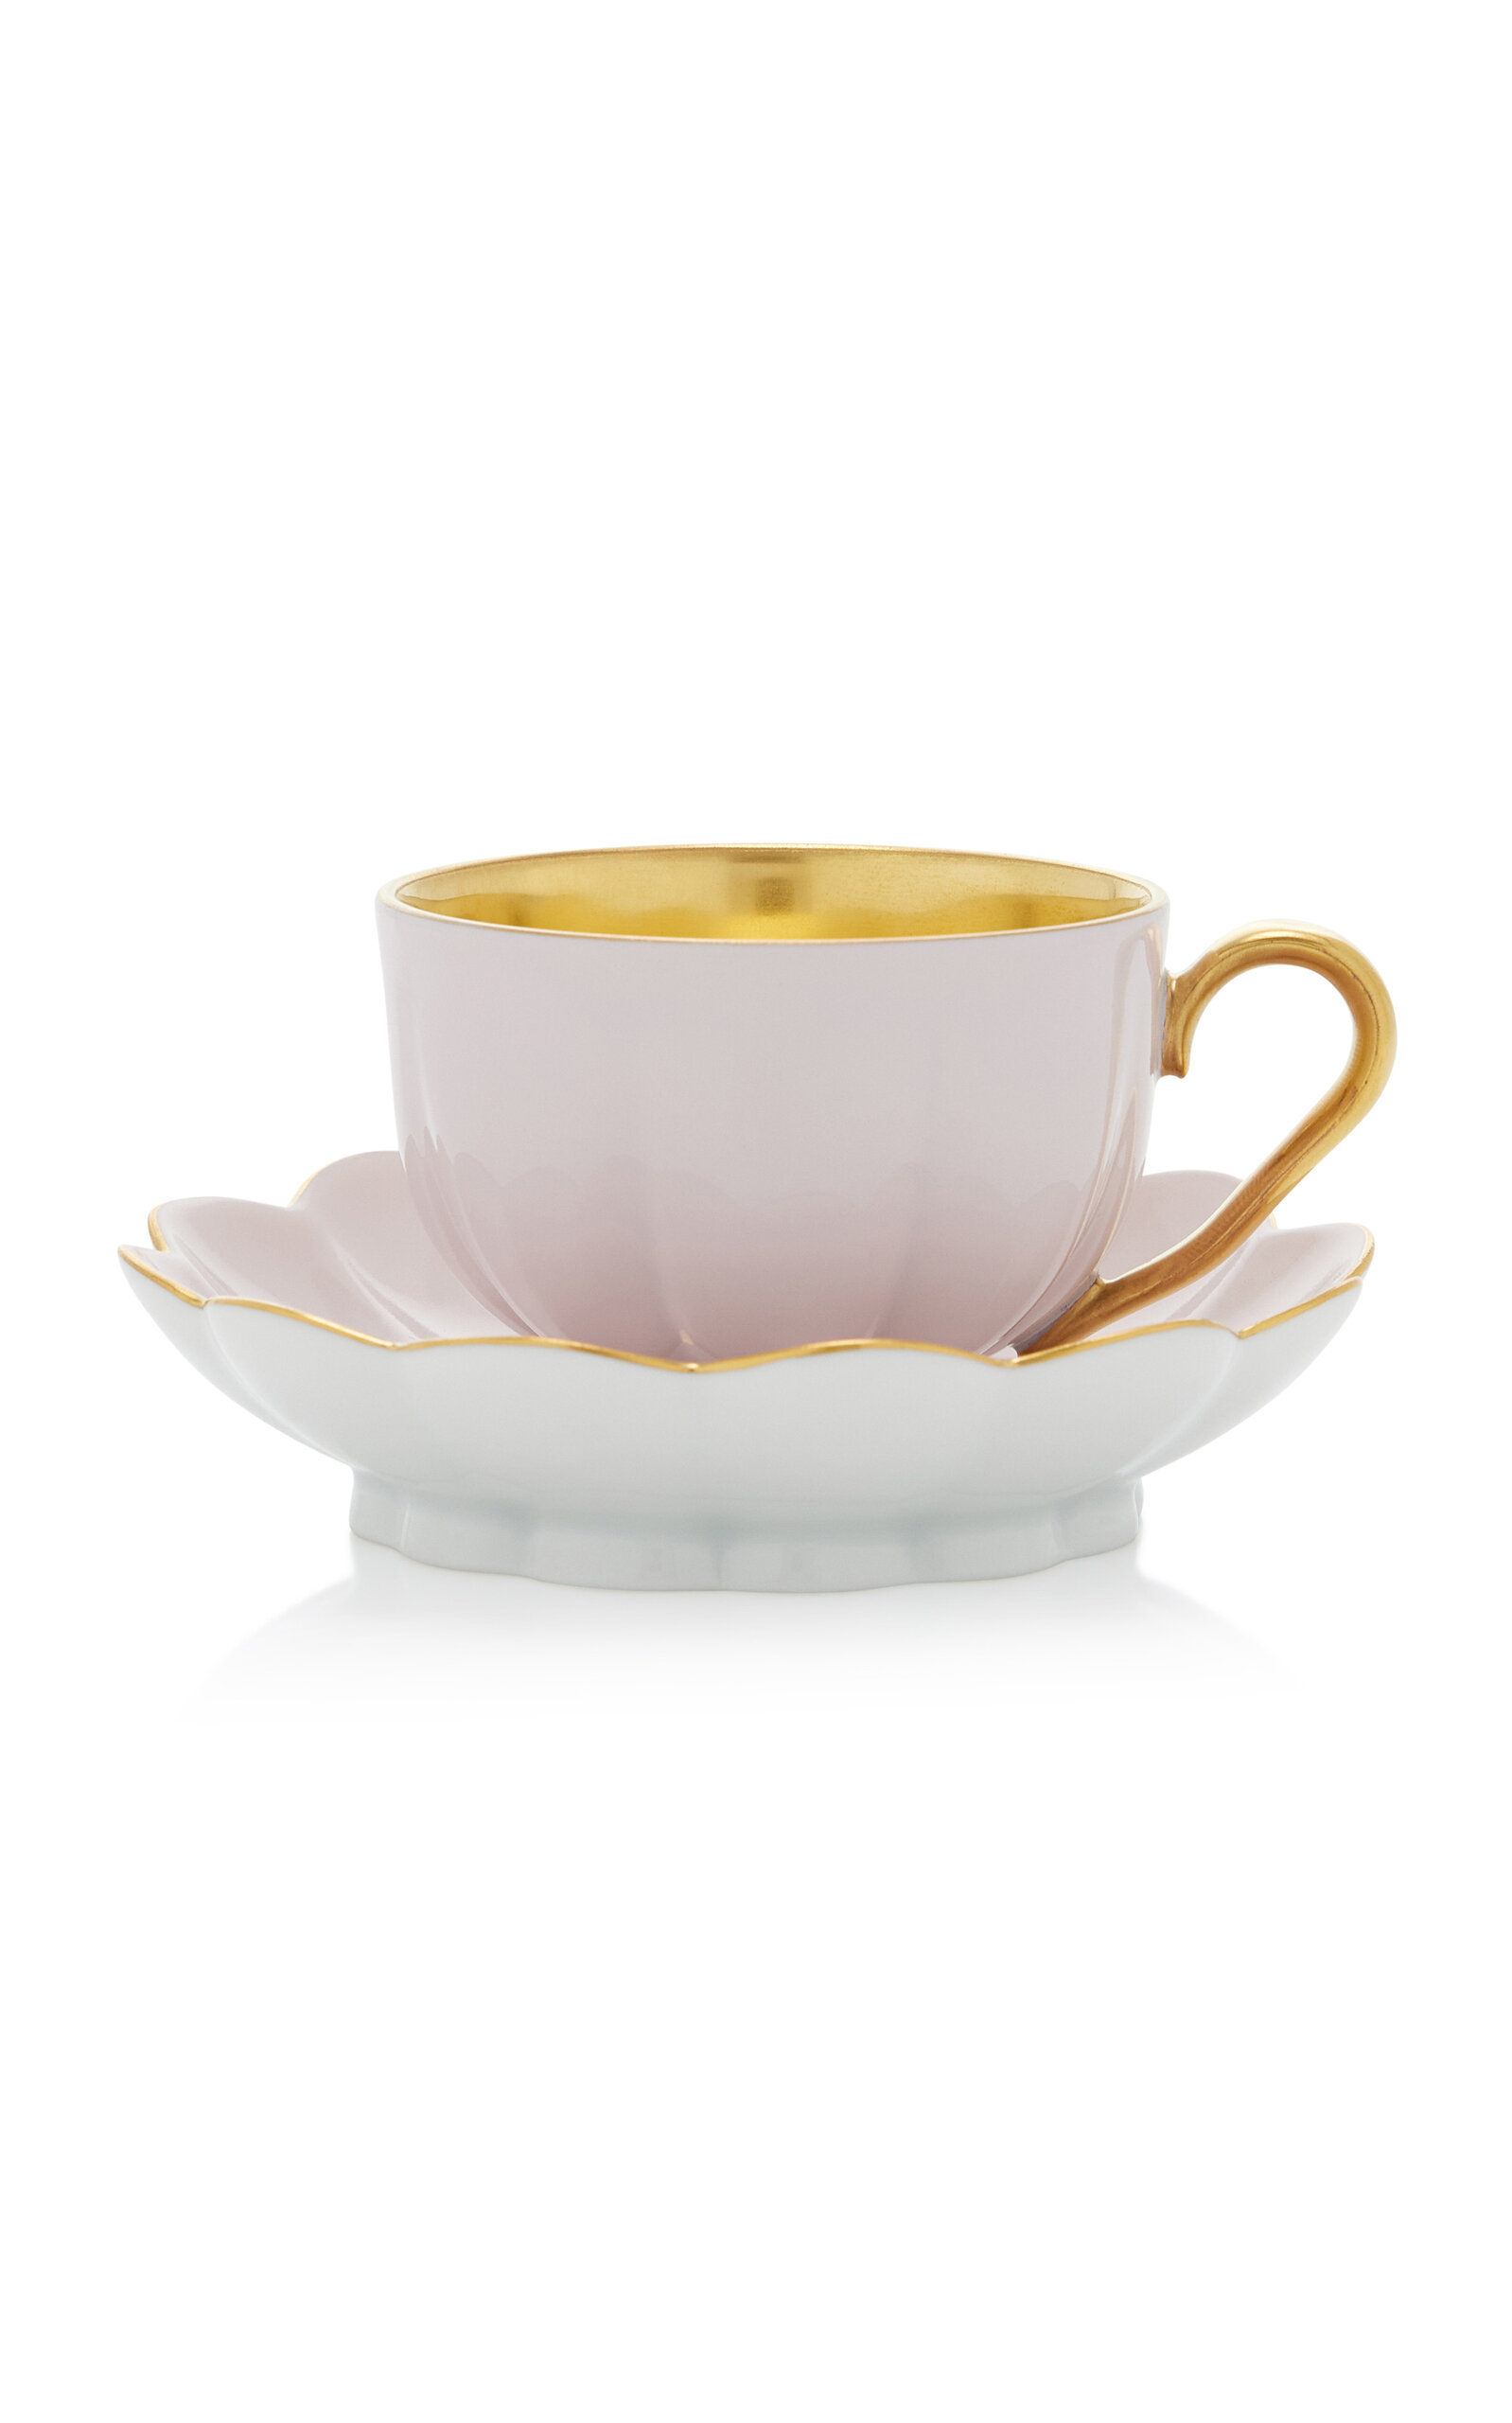 Augarten Wien Porcelain Coffee Cup And Saucer In White